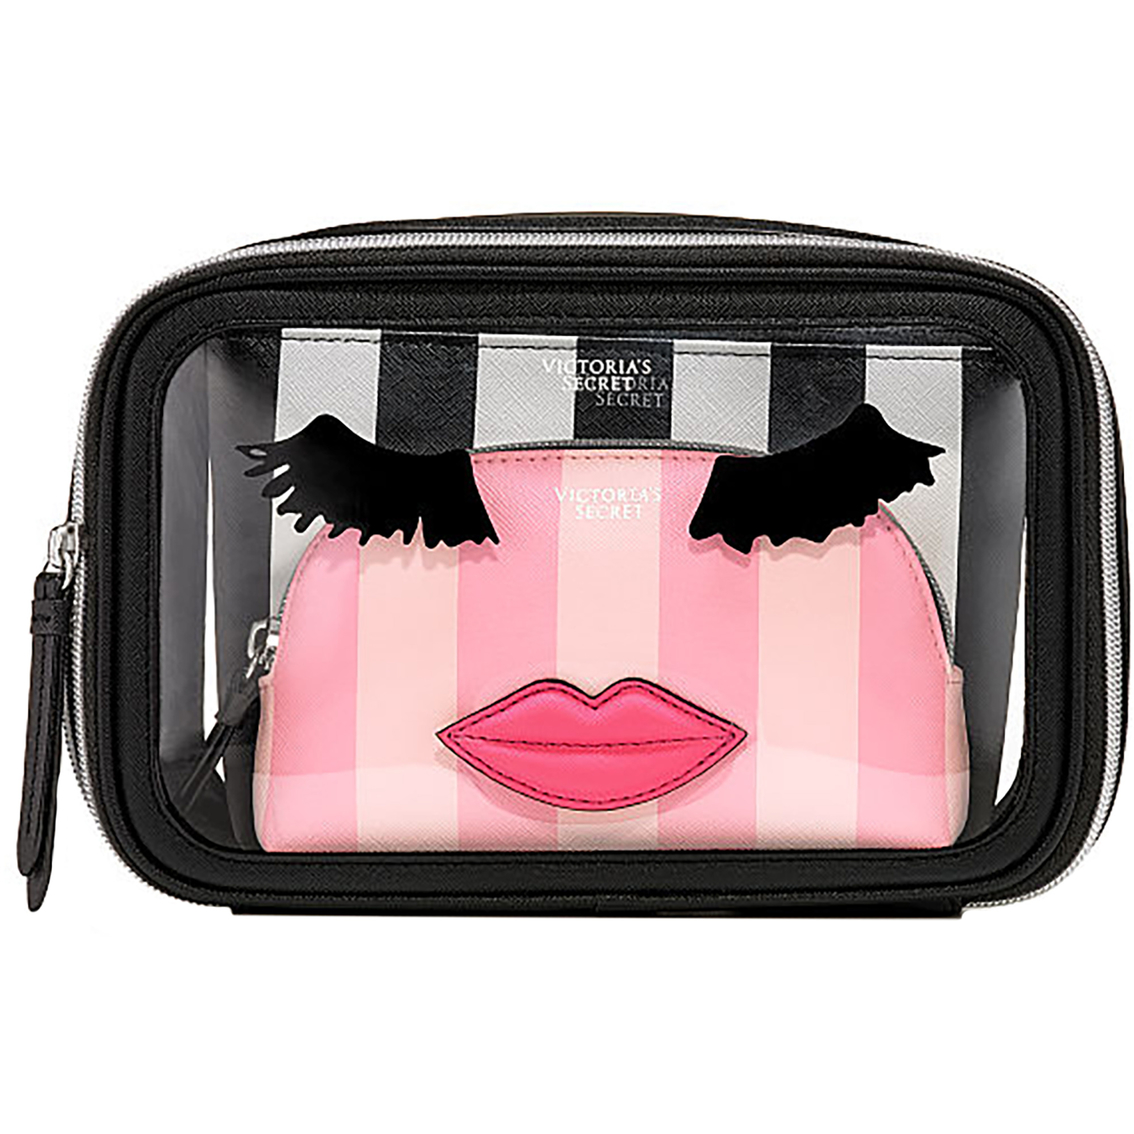 Victoria's Secret Nested Cosmetic Bag Trio | Cosmetic Bags | Clothing ...